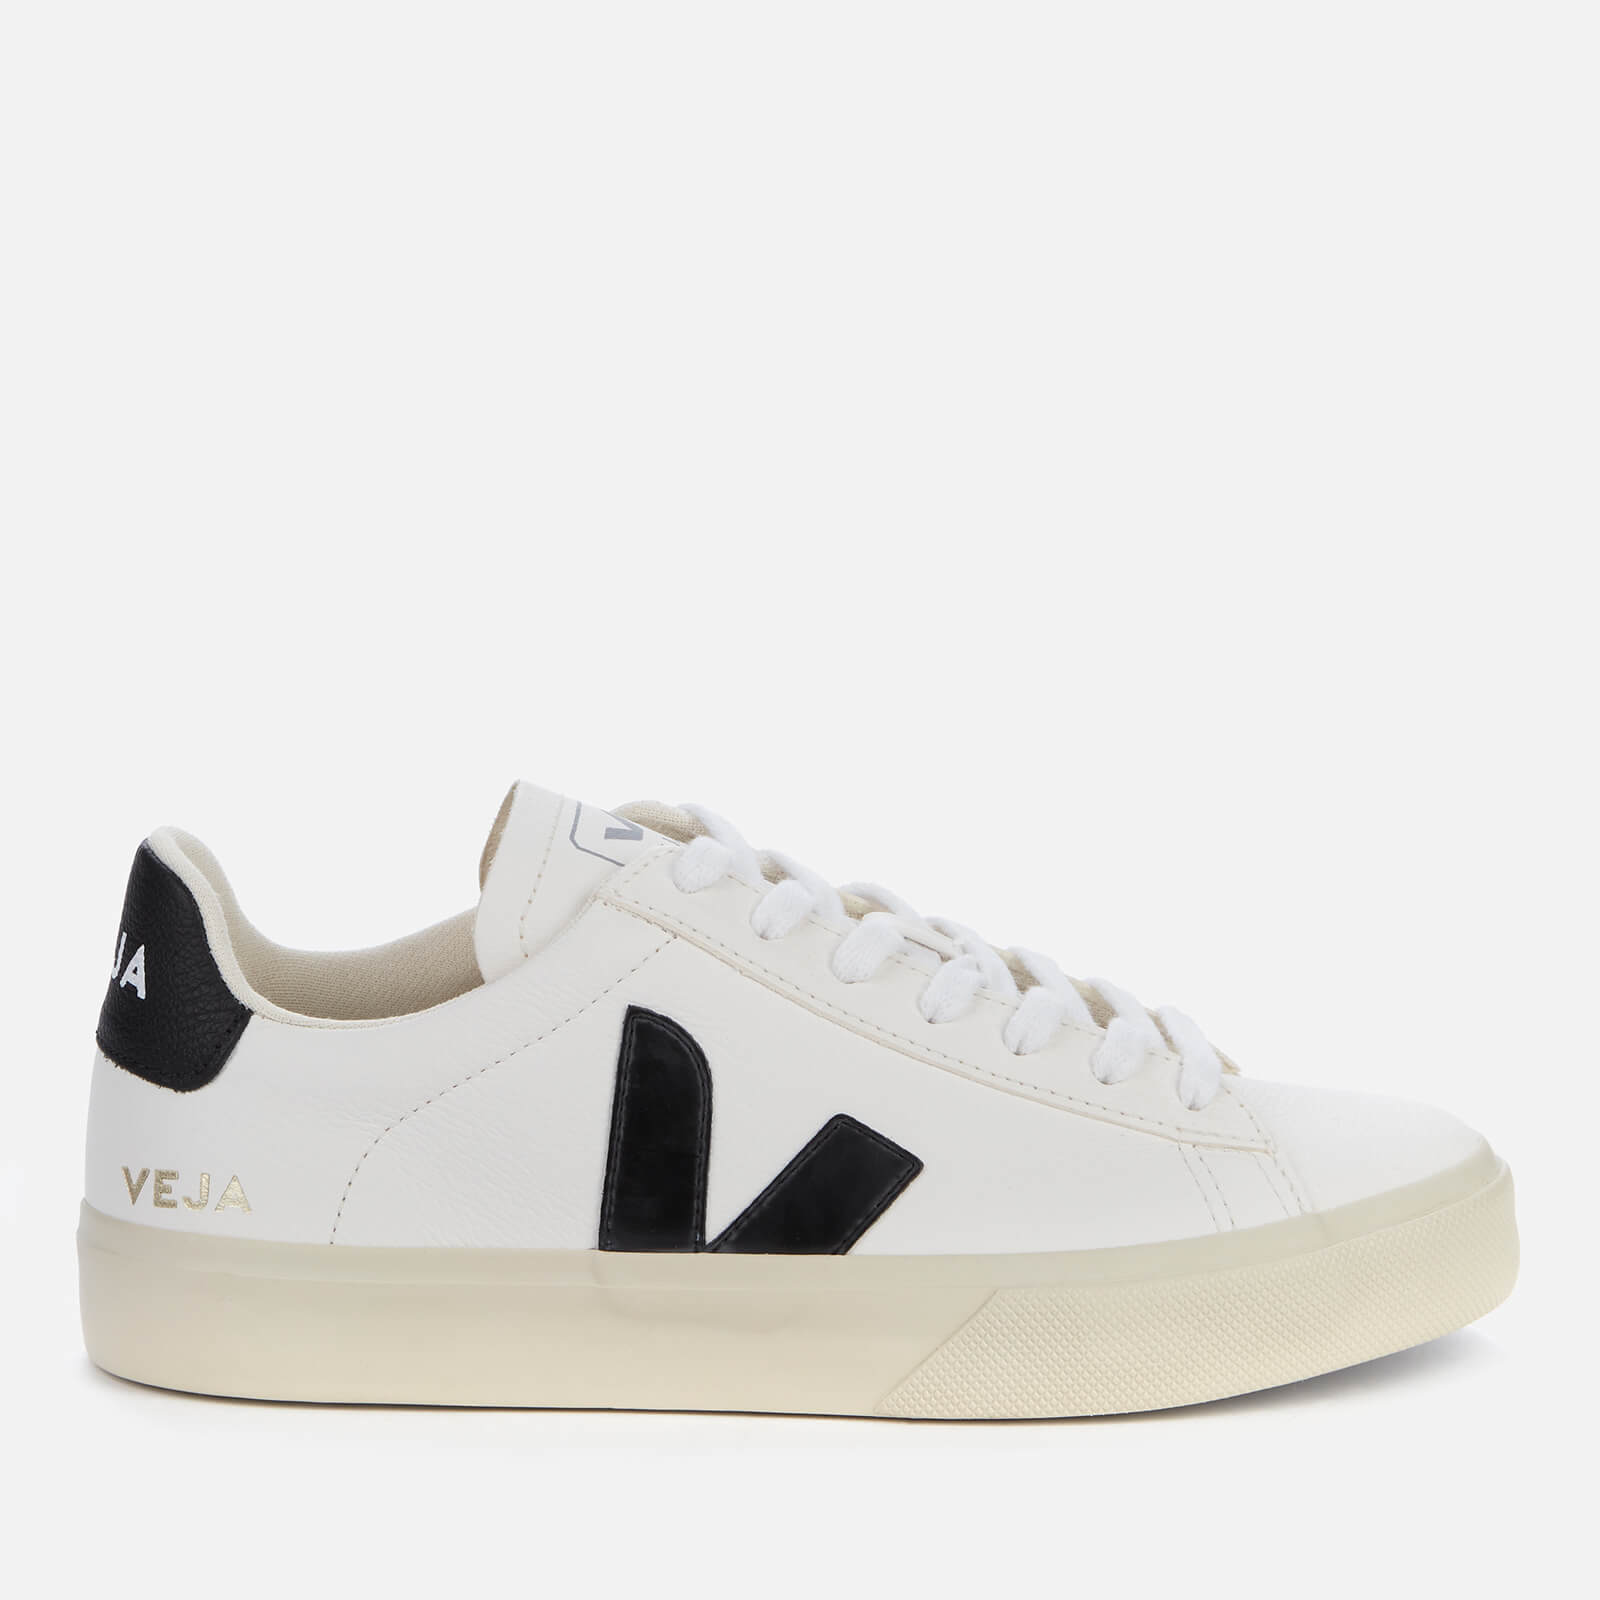 Veja Women’s Campo Chrome Free Leather Trainers - Extra White/Black